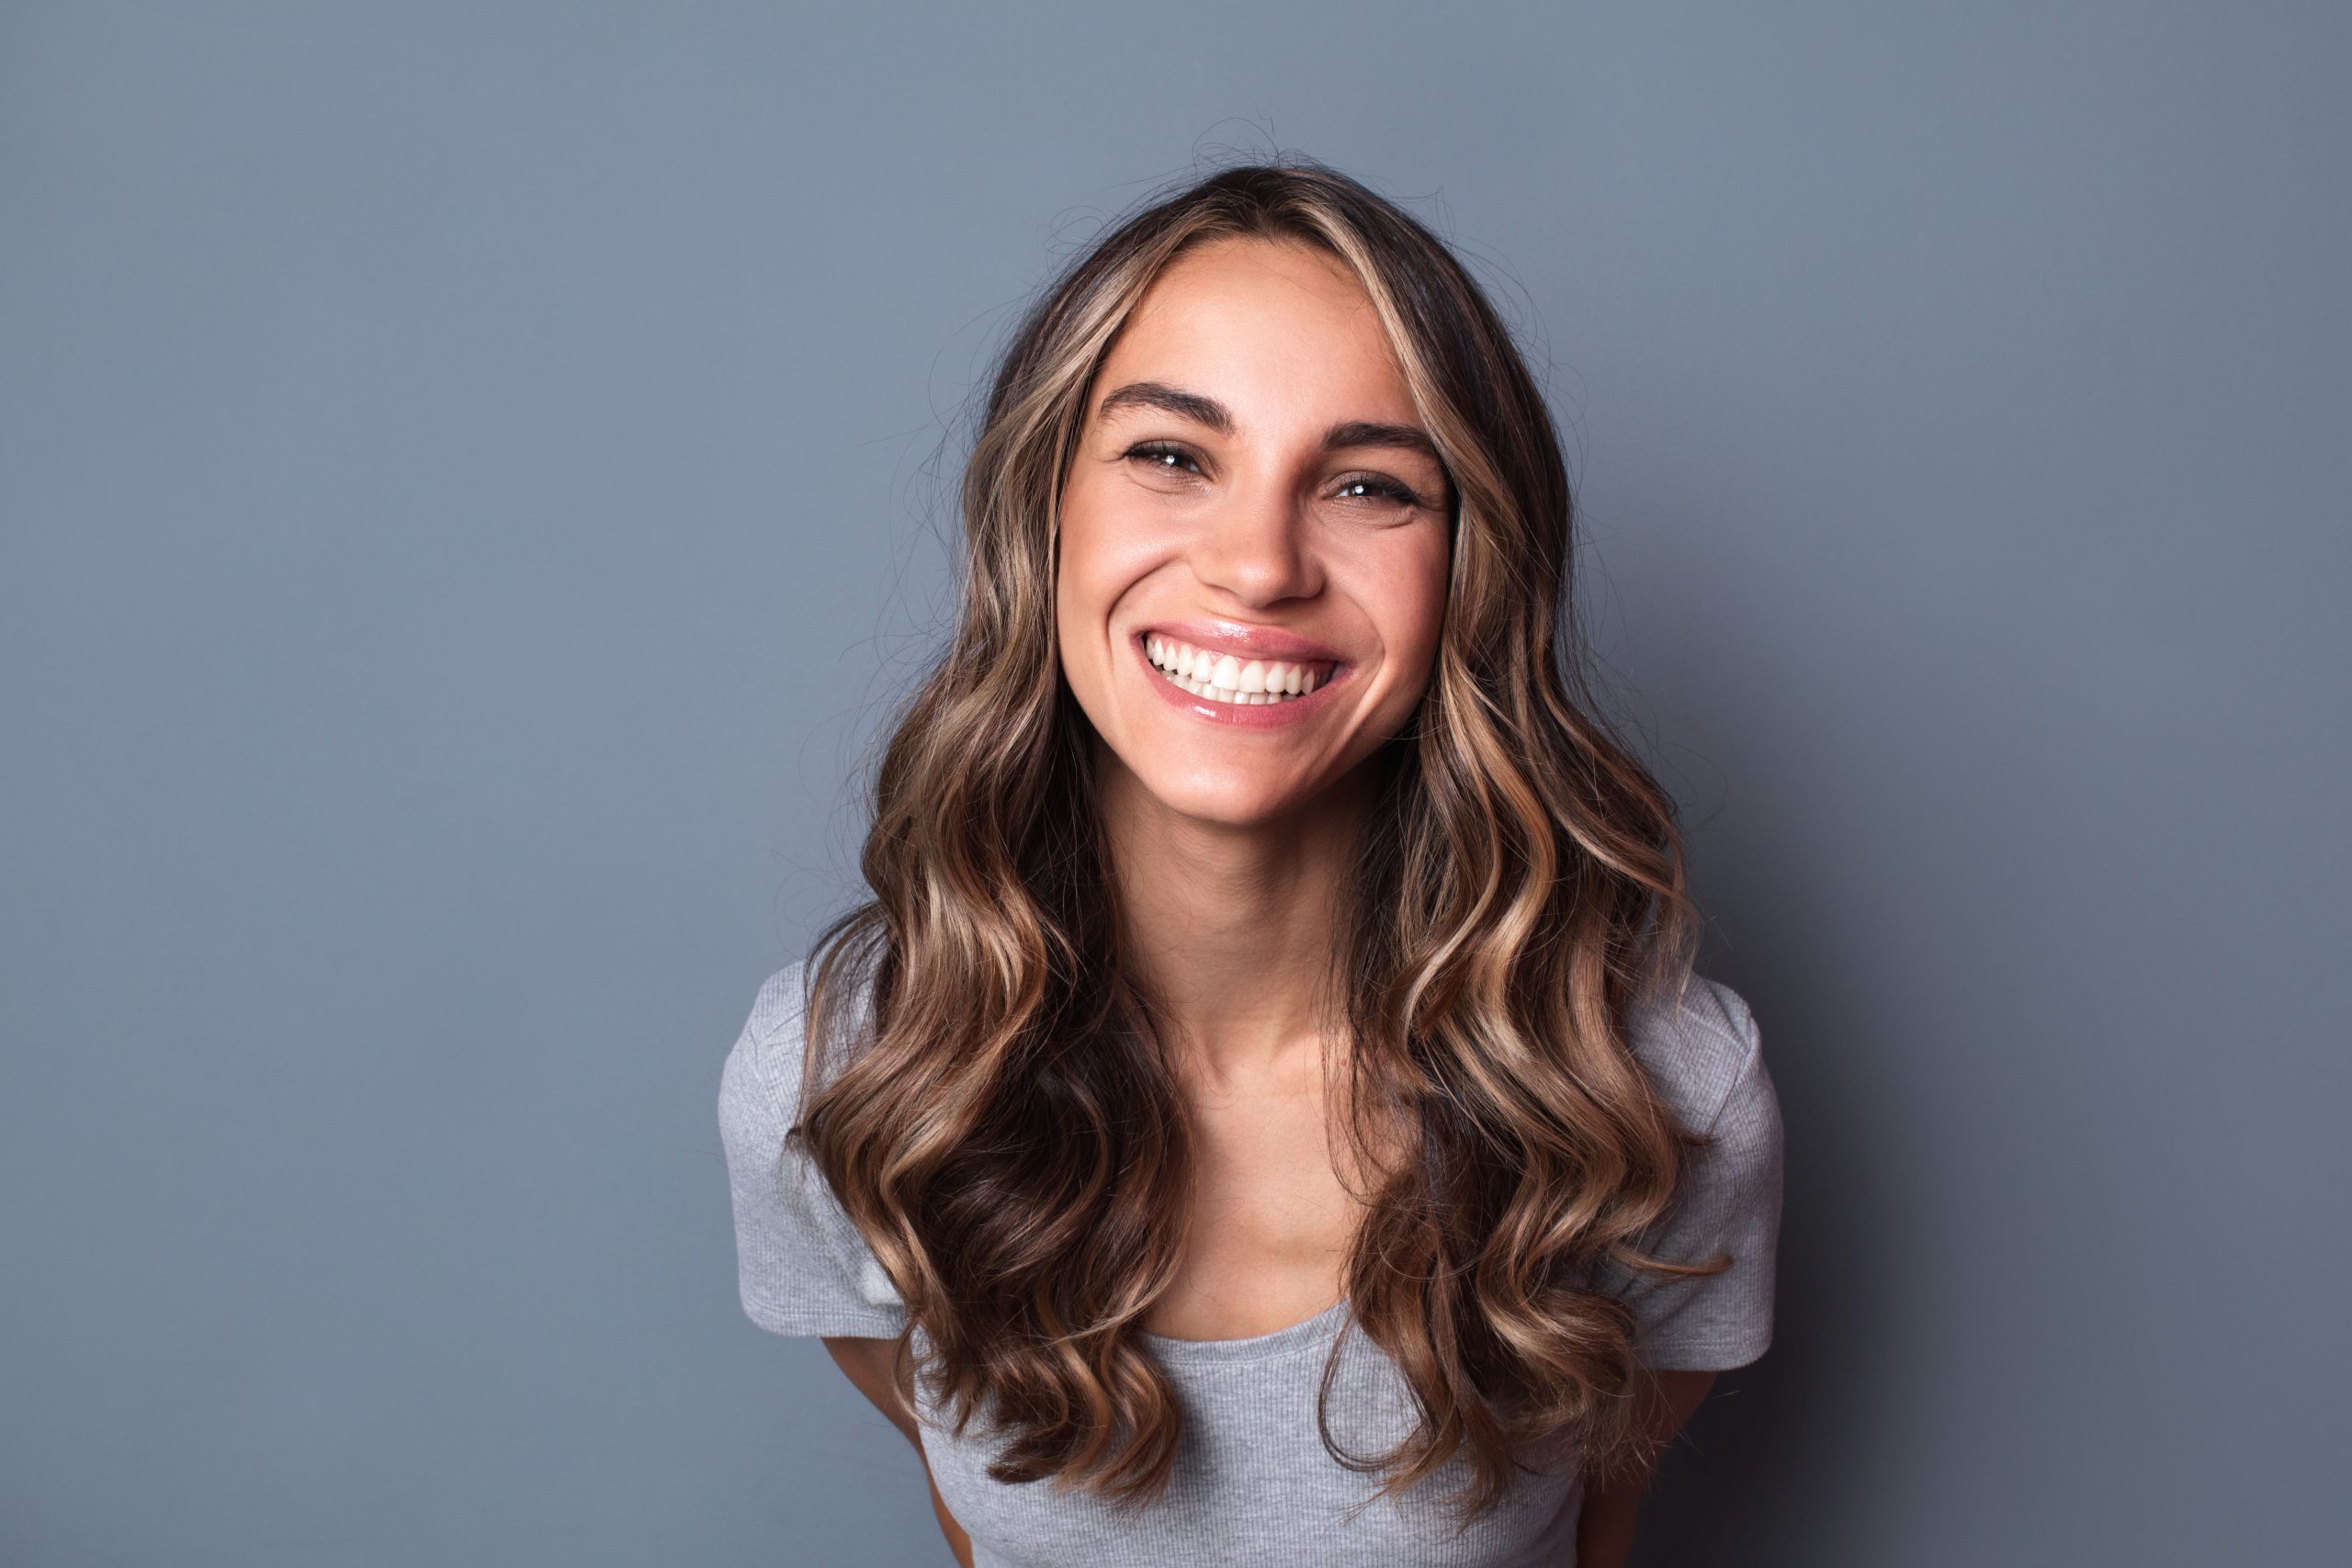 Portrait of young beautiful cute cheerful girl smiling looking at camera. Isolated close-up portrait of woman.